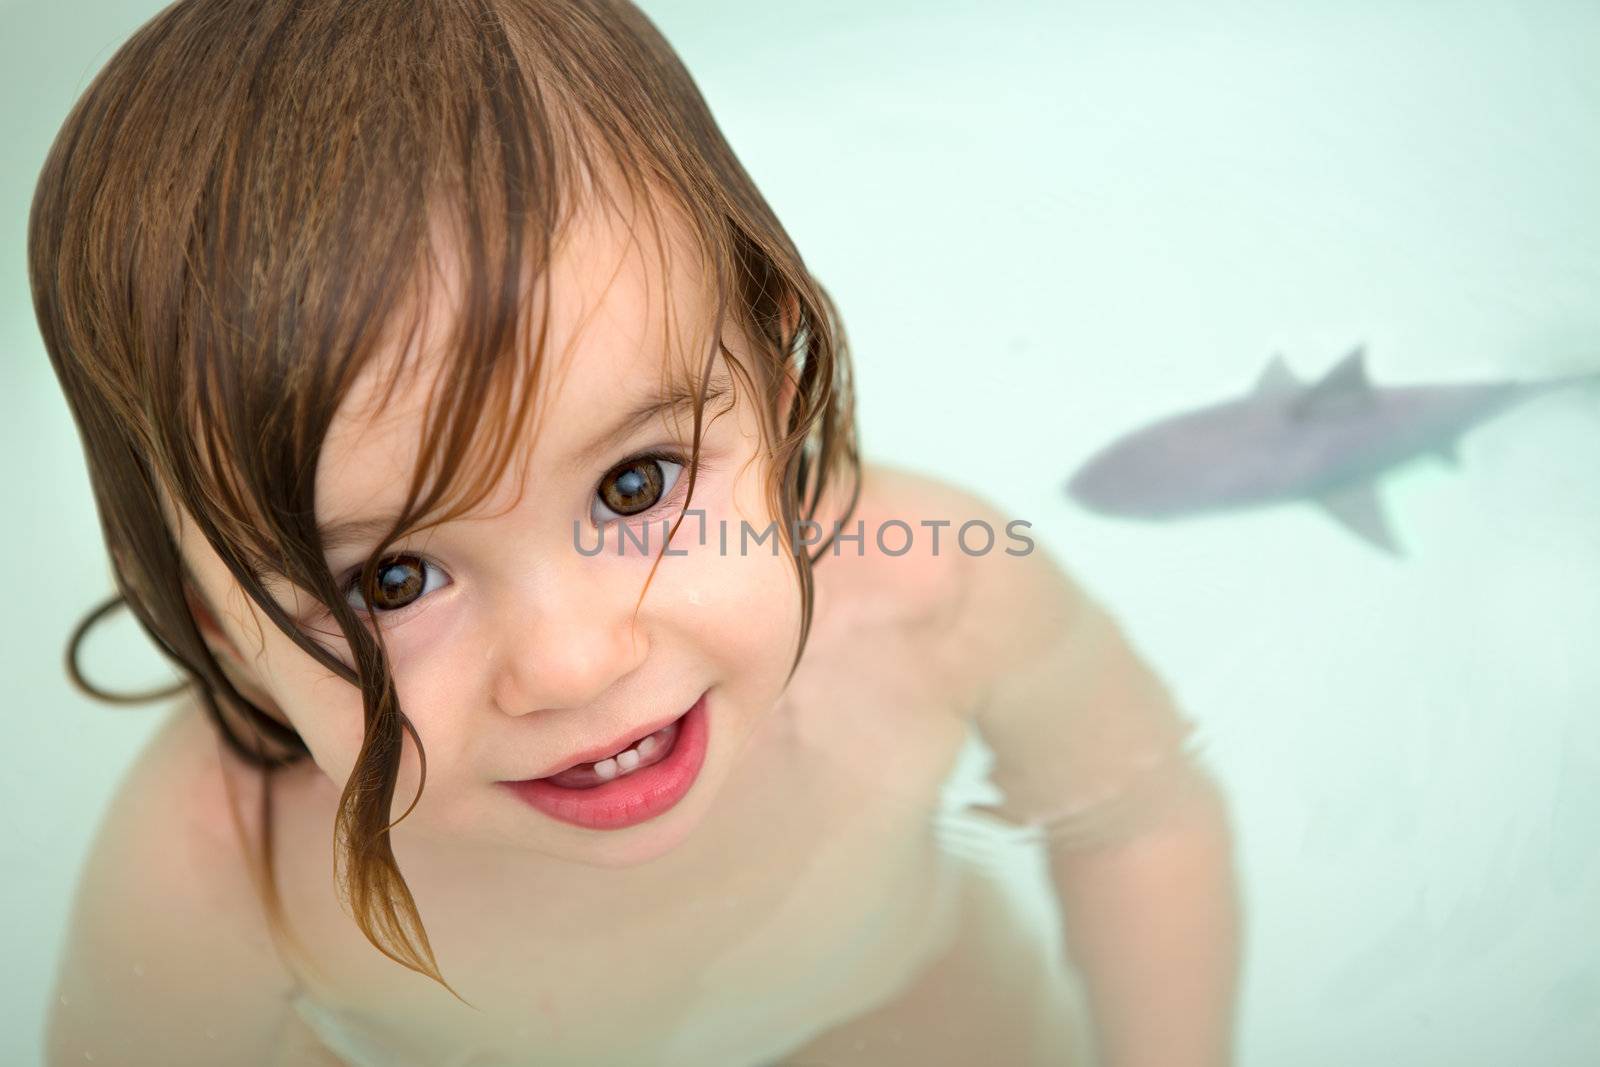 Toddler Girl swimming with her shark toy and looking at camera from the bathtub.